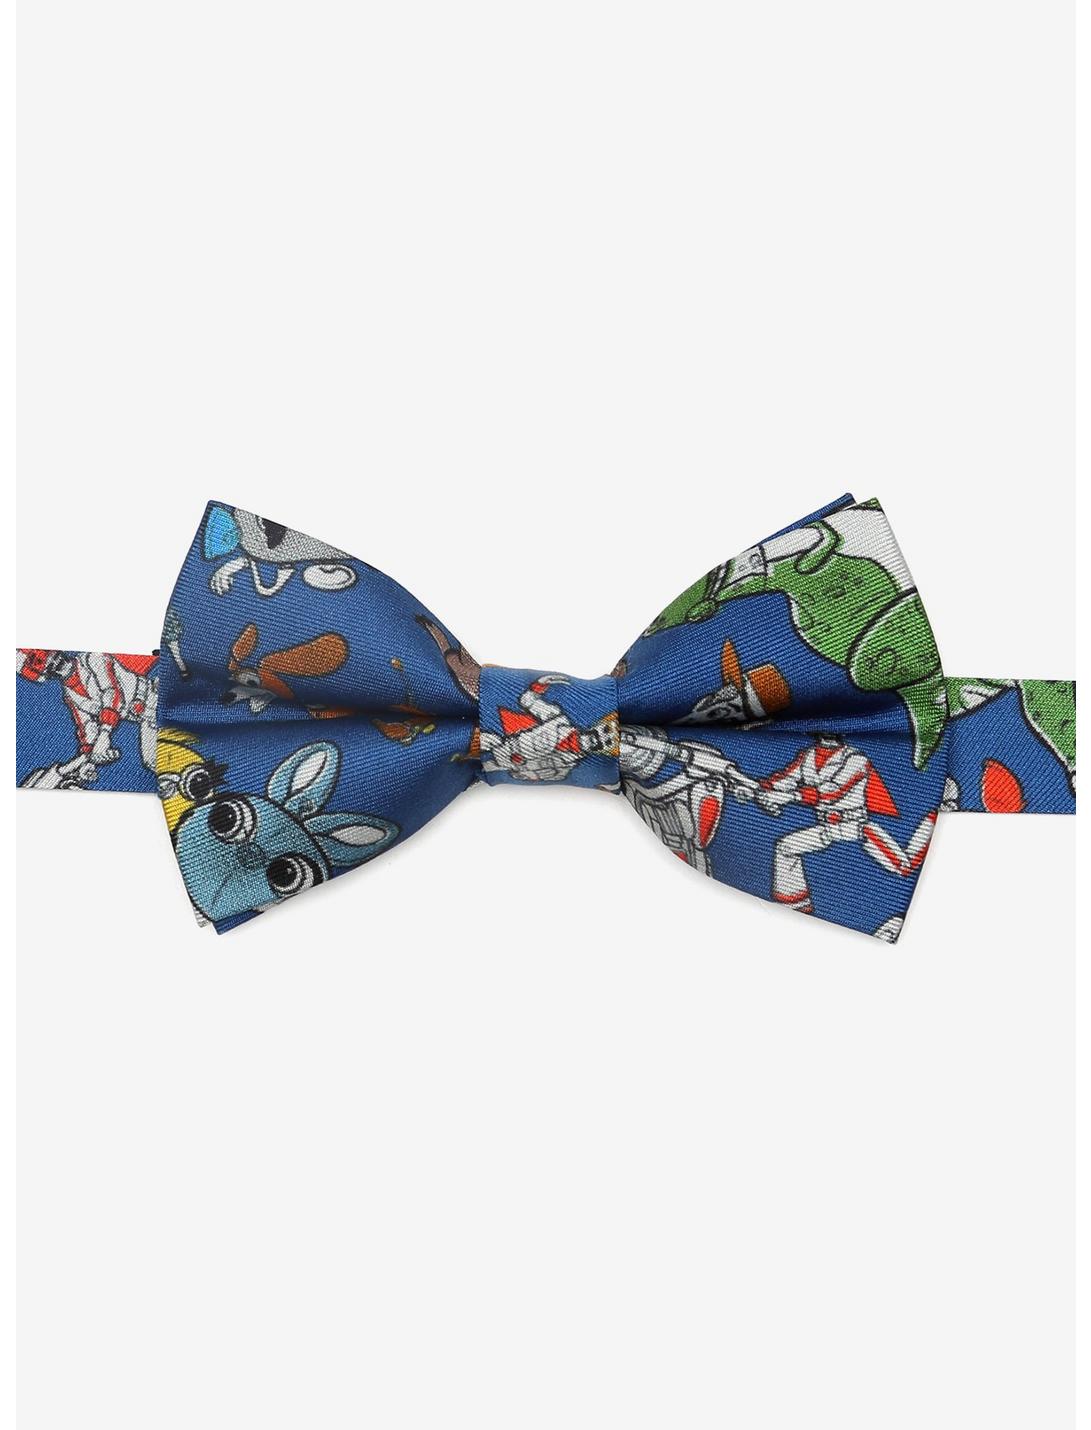 Disney Pixar Toy Story 4 Characters Blue Big Youth Bow Tie | BoxLunch